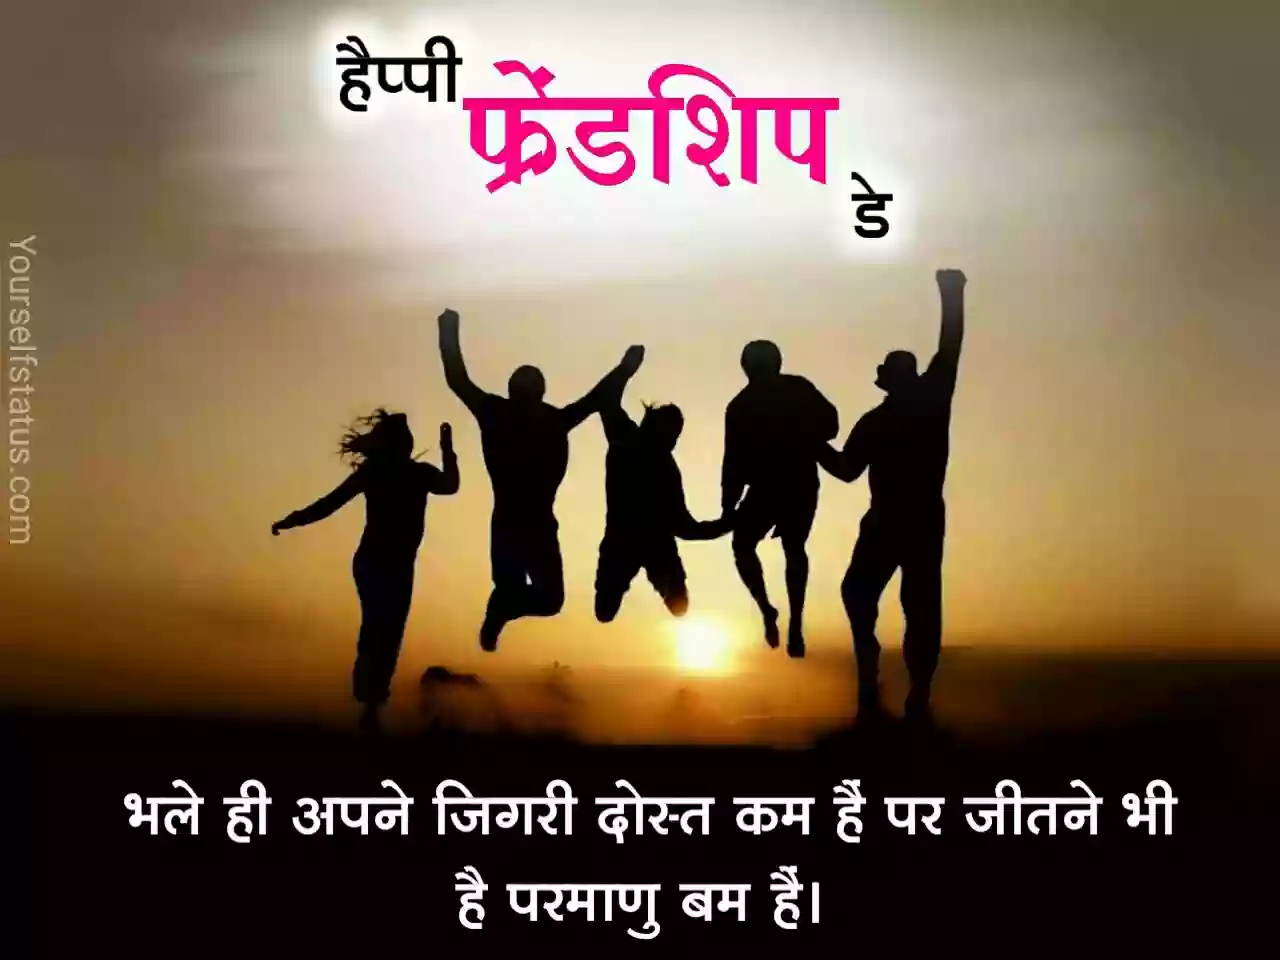 Happy friendship day quotes in hindi